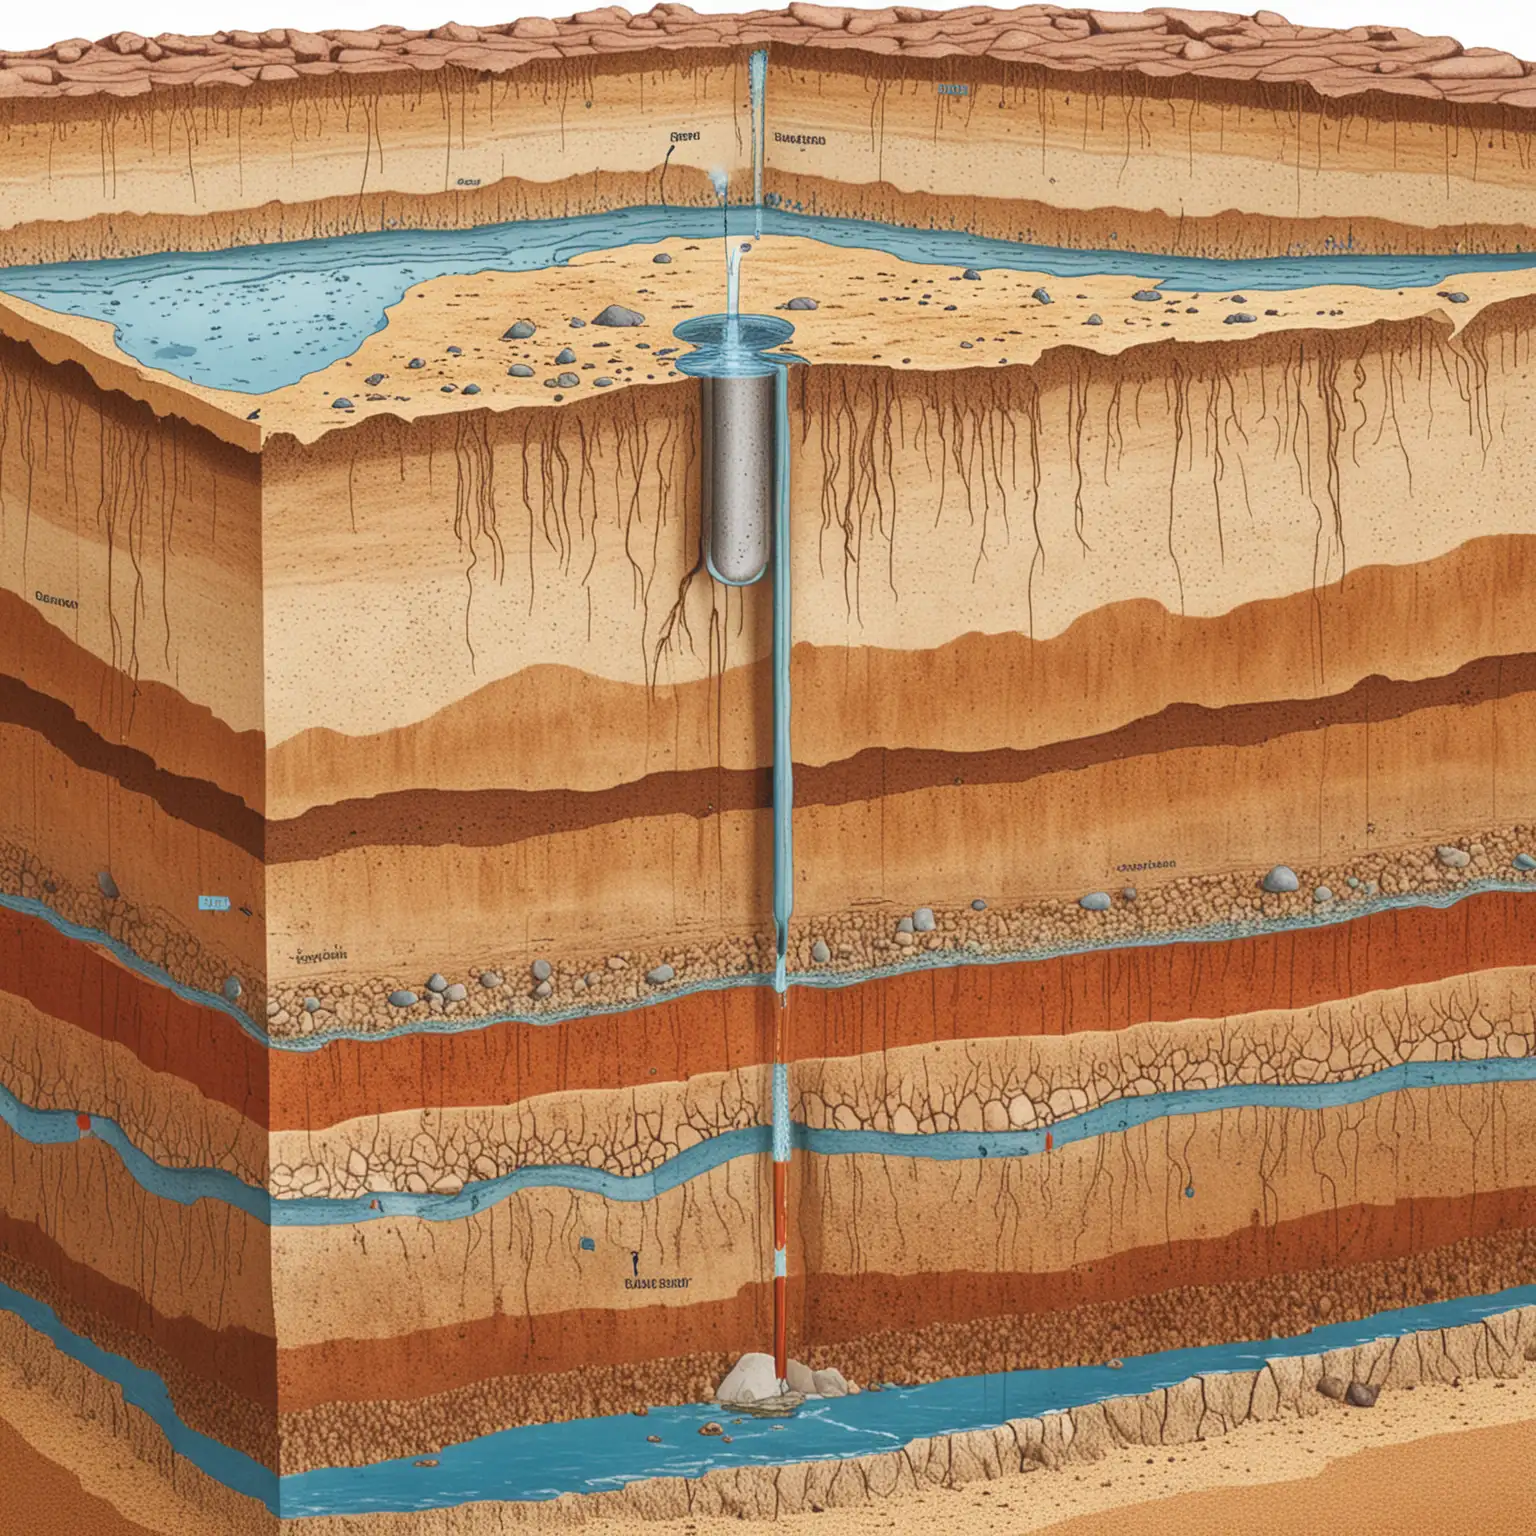 CrossSection-Diagram-Earths-Surface-and-Groundwater-Layers